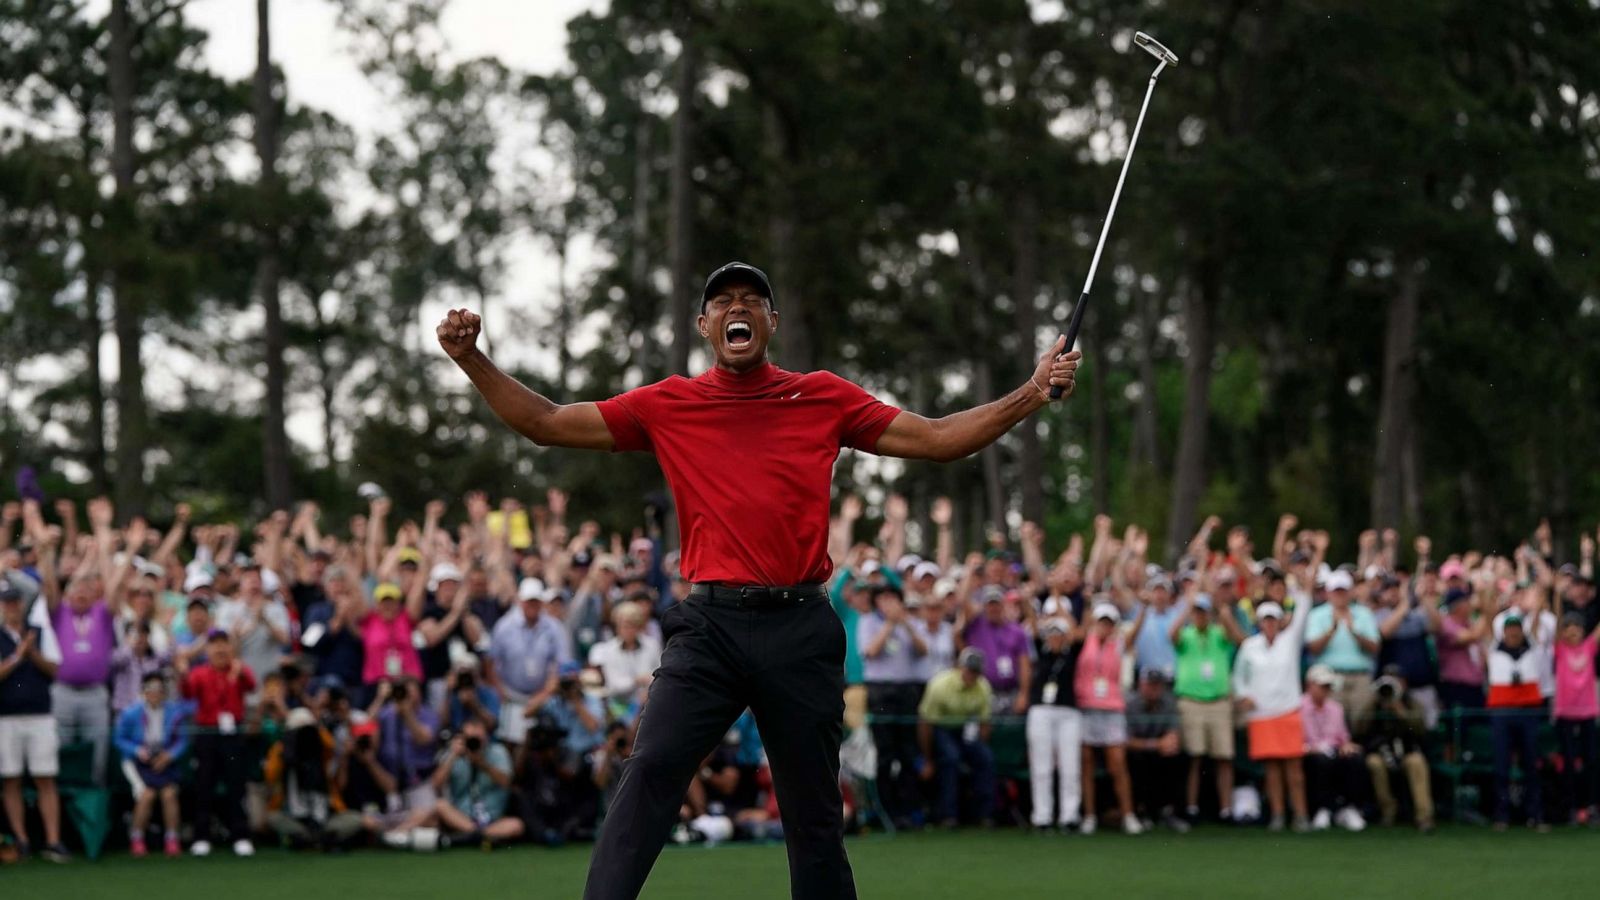 In which year did Tiger Woods win his first major championship?